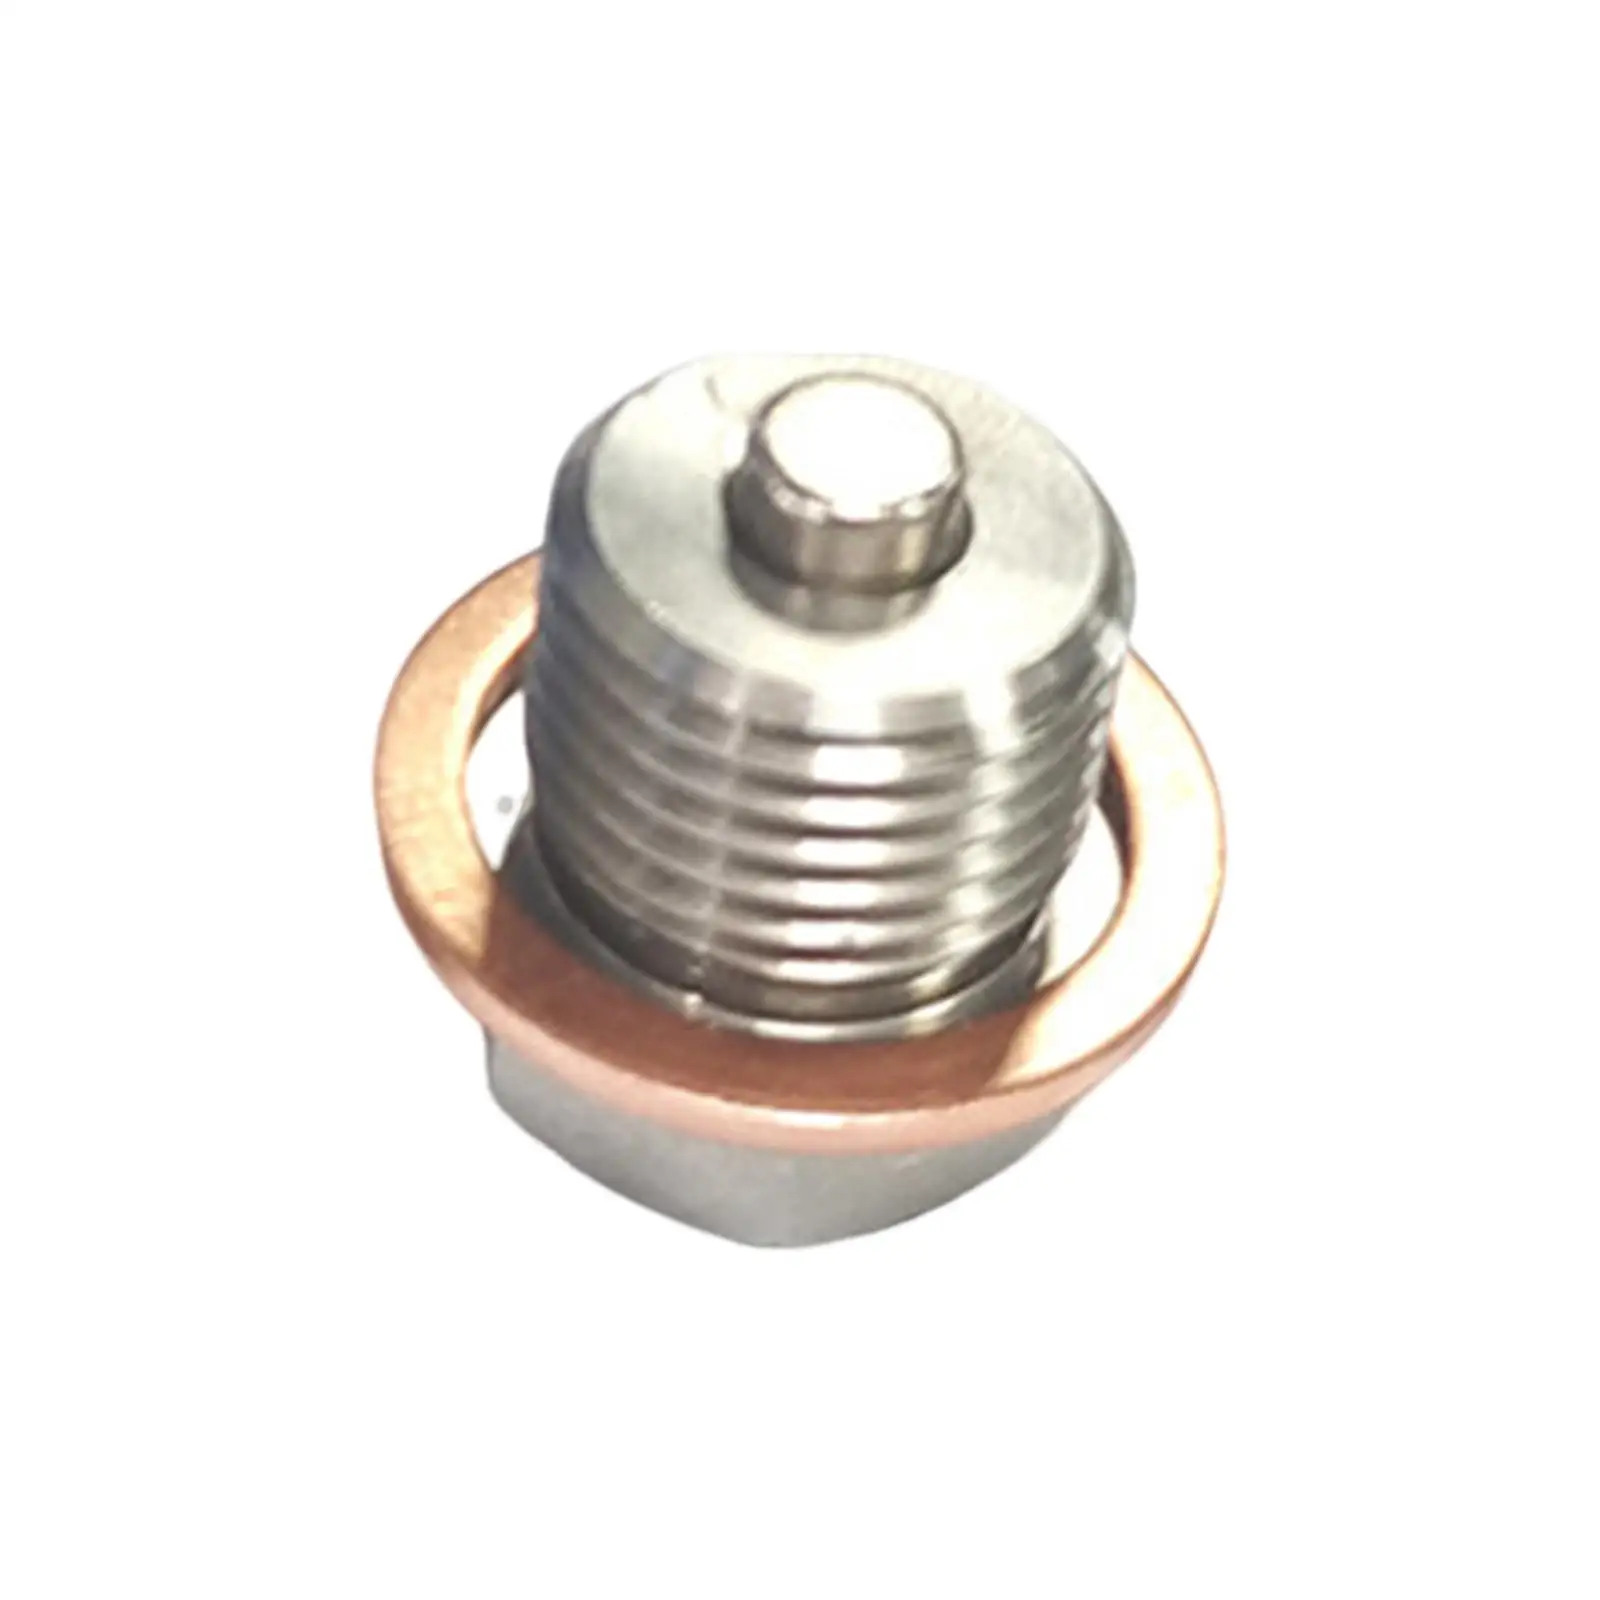 Magnetic Oil Drain Plug M12x1.75 with Cooper Washer Accessories Easy to Install Neodymium Magnet Bolt for Motorcycle Car